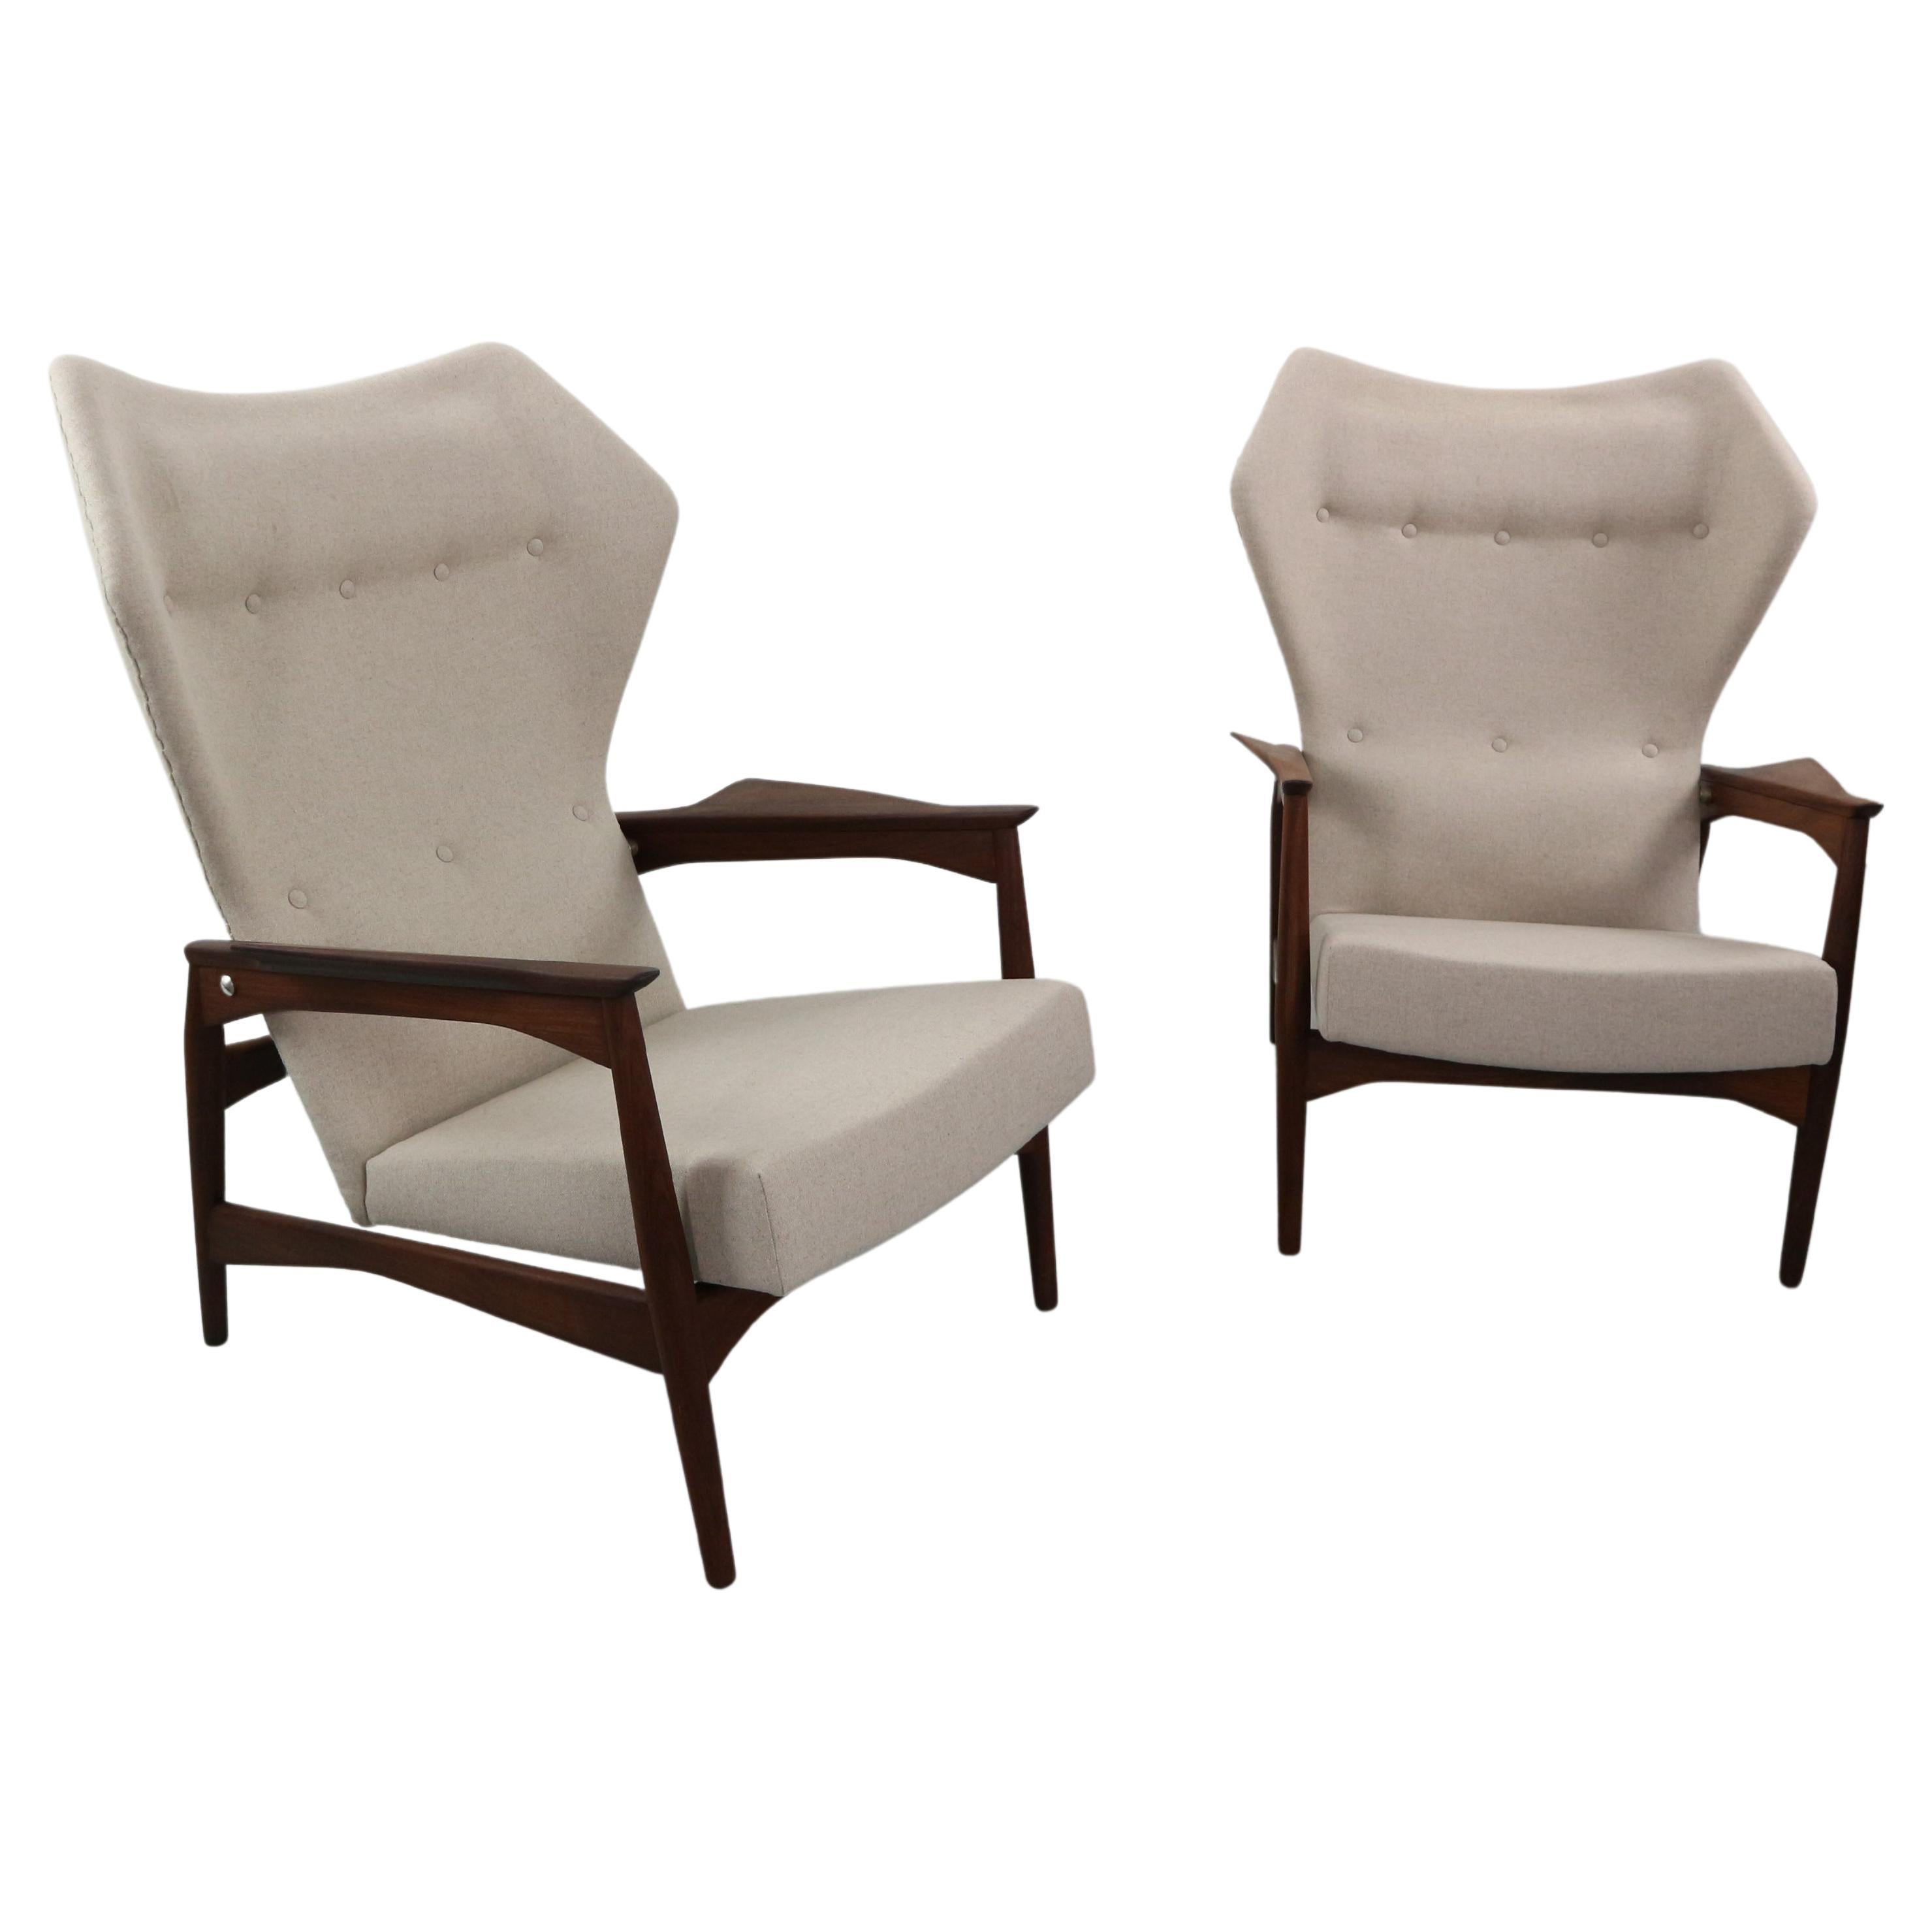 Set of Two Danish Adjustable Wingback Lounge Chairs in Teak by Ib Kofod Larsen For Sale